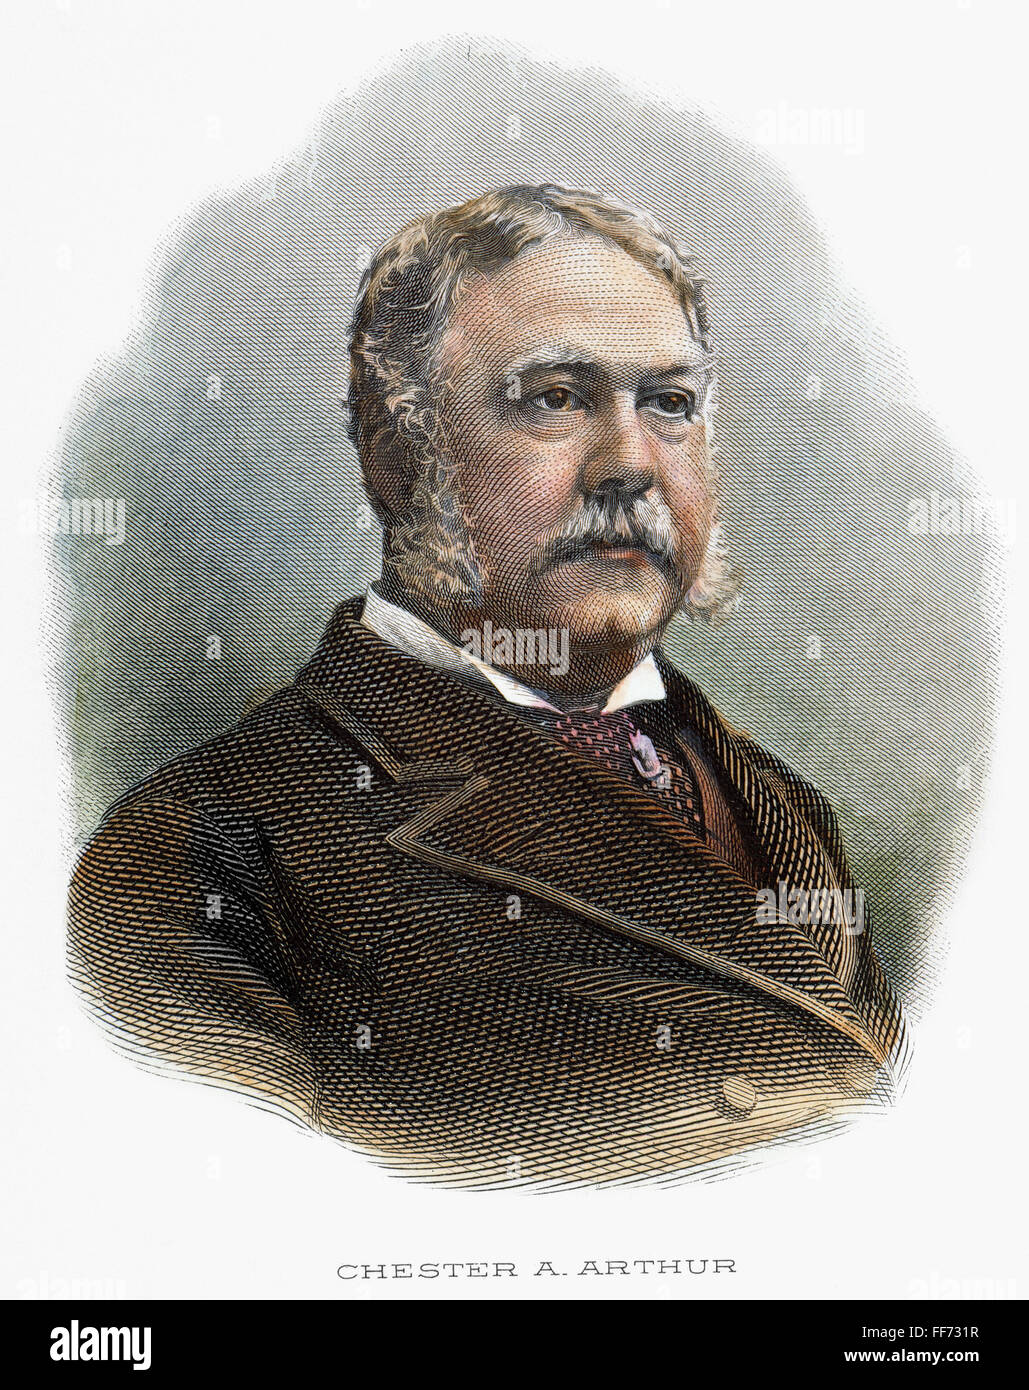 CHESTER A. ARTHUR /n(1830-1886). Stahlstich. Stockfoto